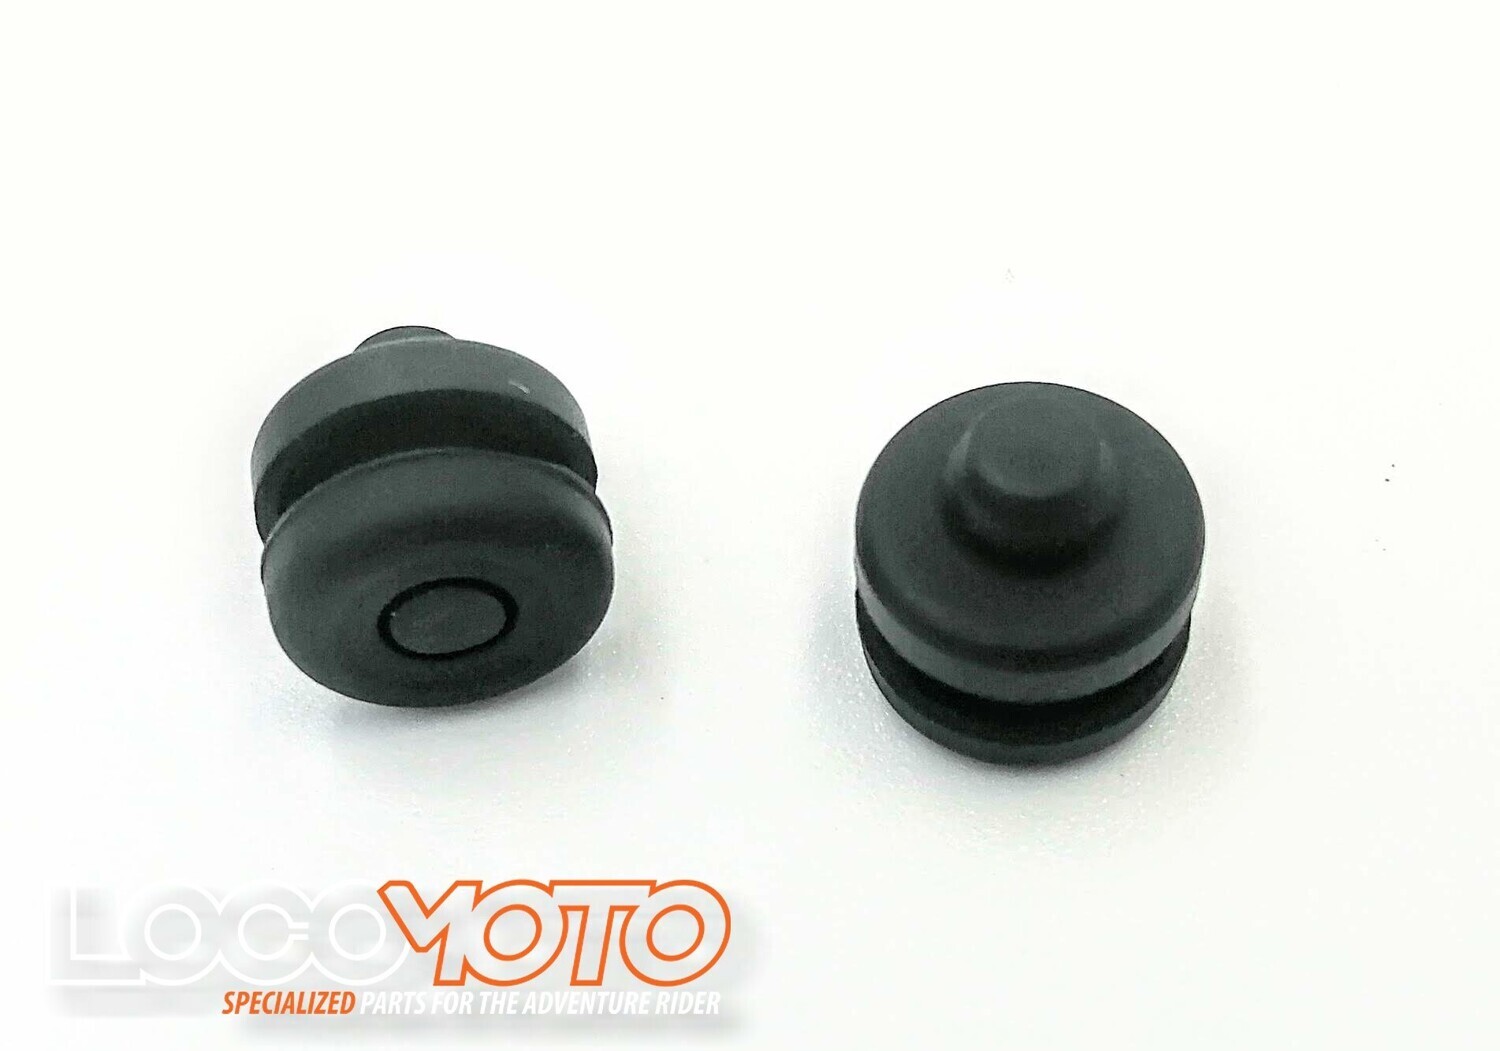 2x KTM Speedometer Silicone buttons